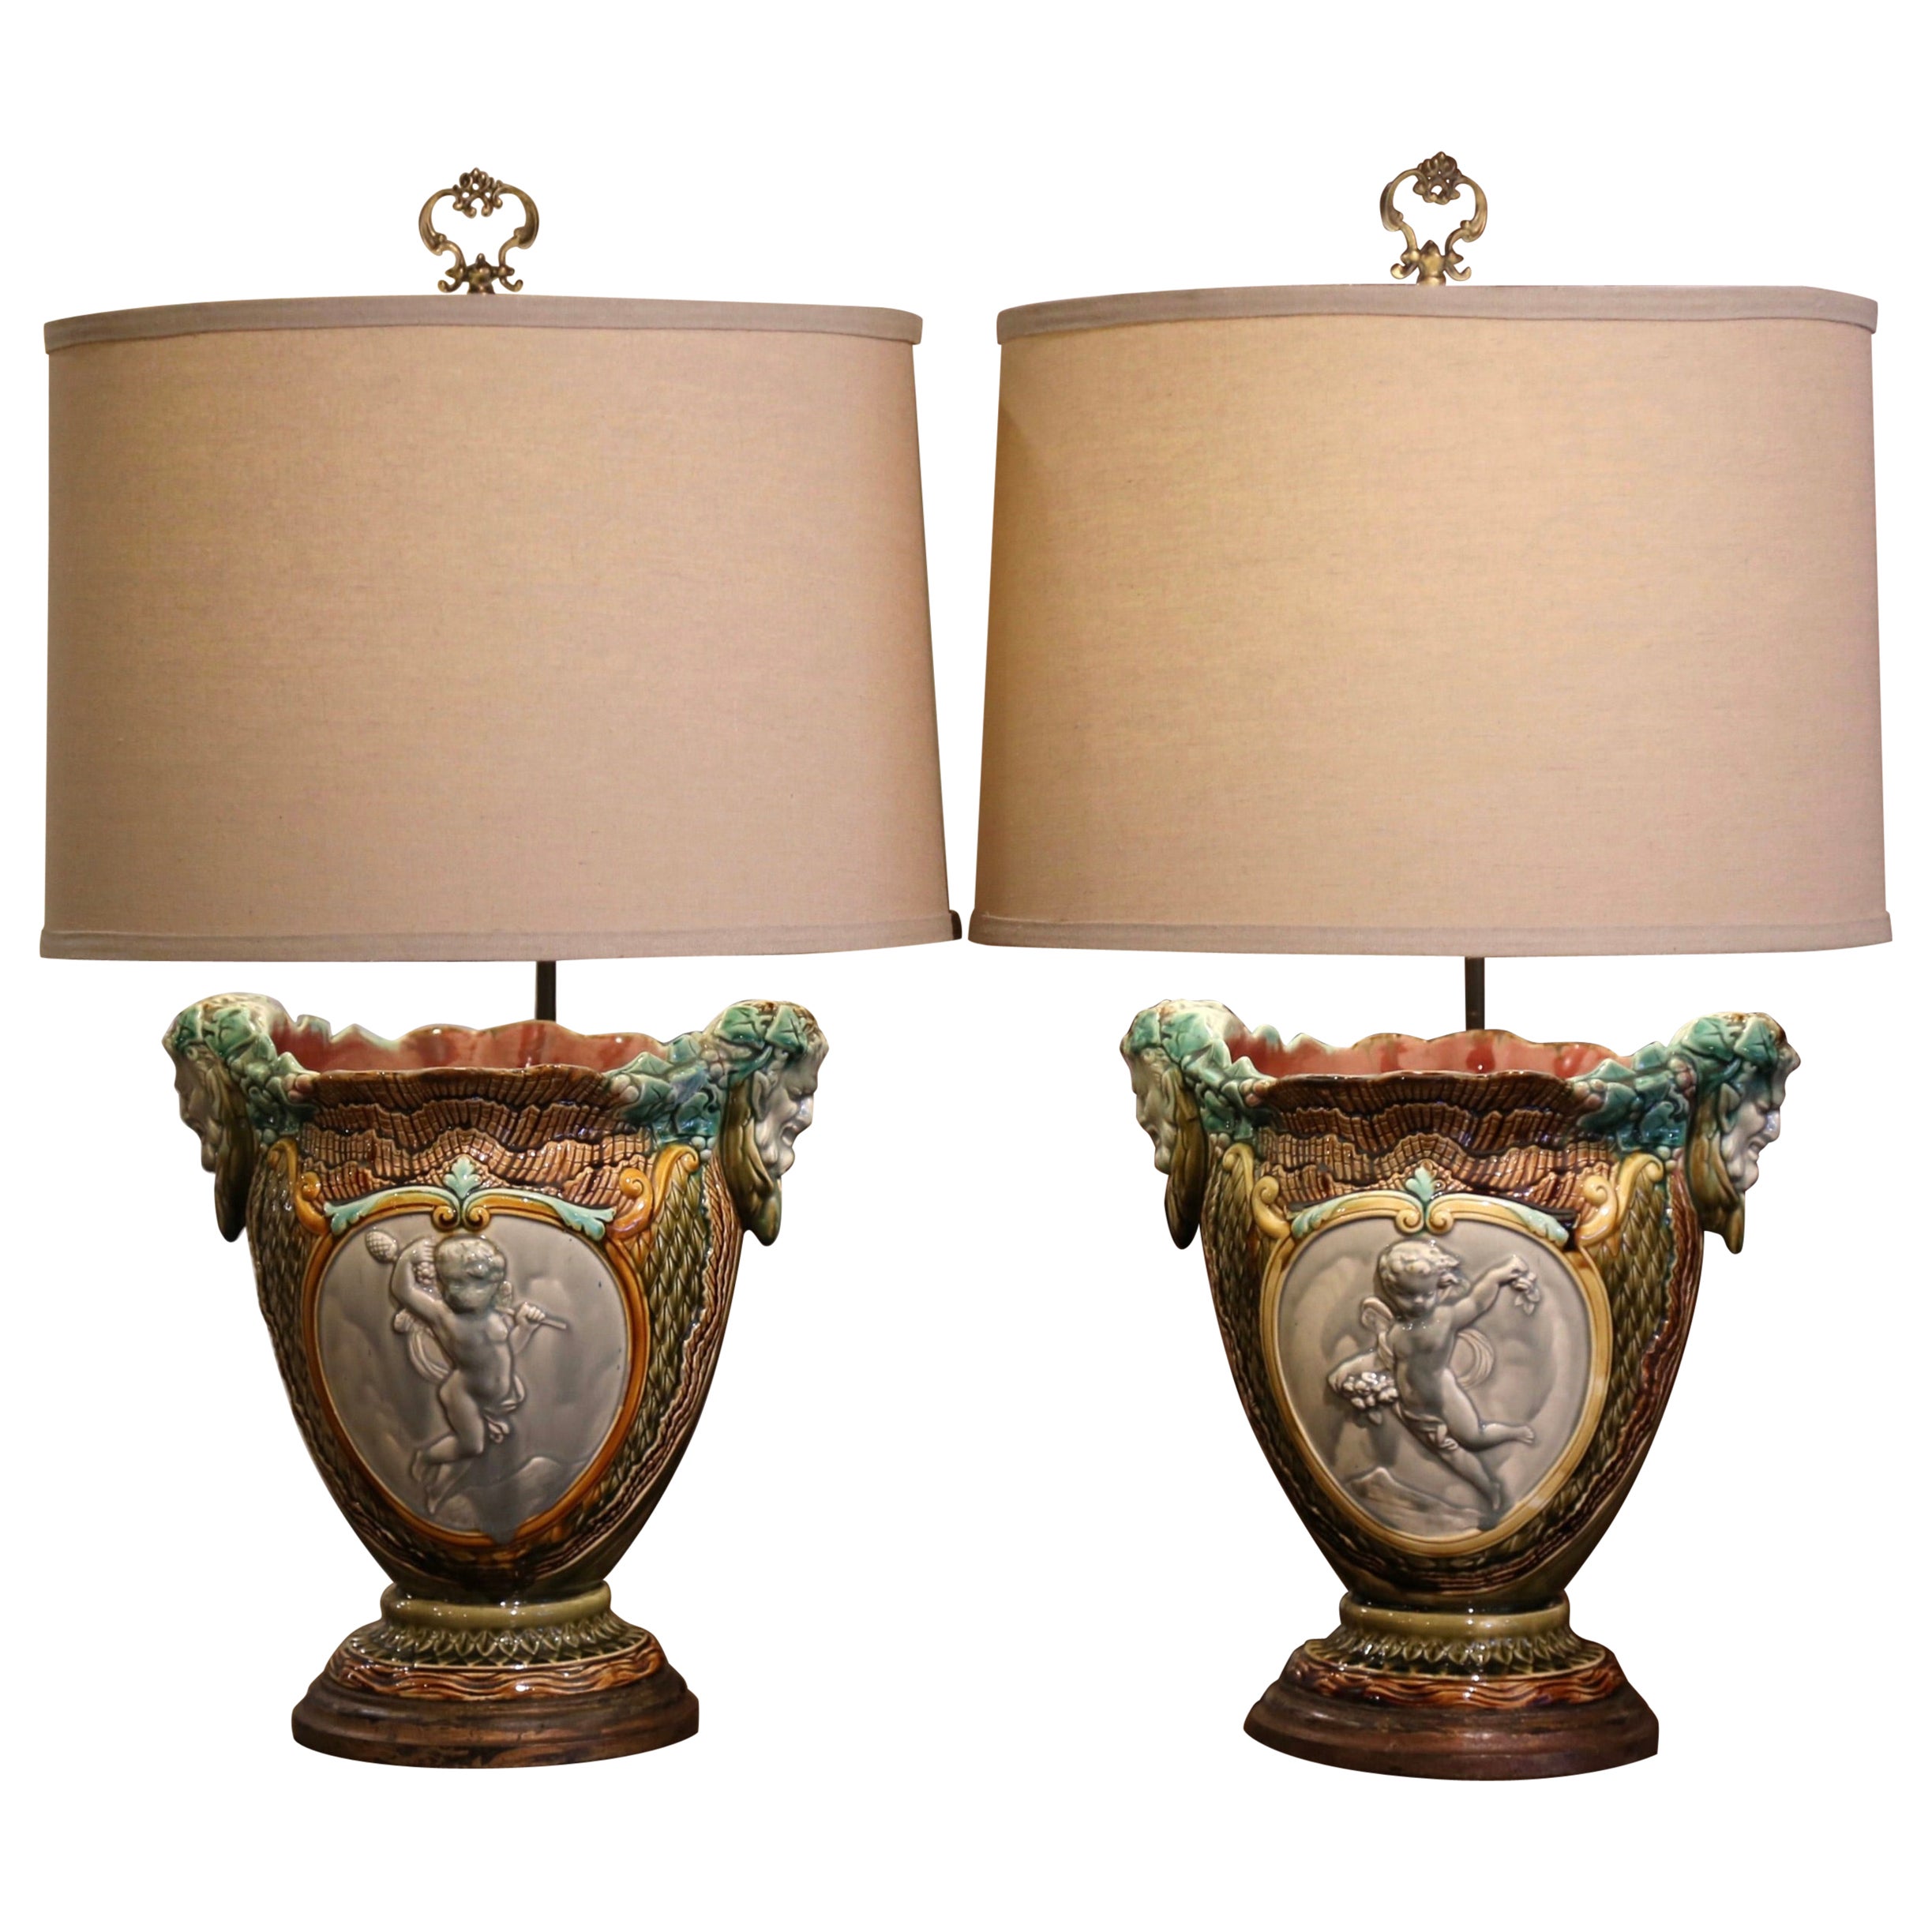 Pair of 19th Century French Barbotine Faience Cache Pots Converted into Lamps